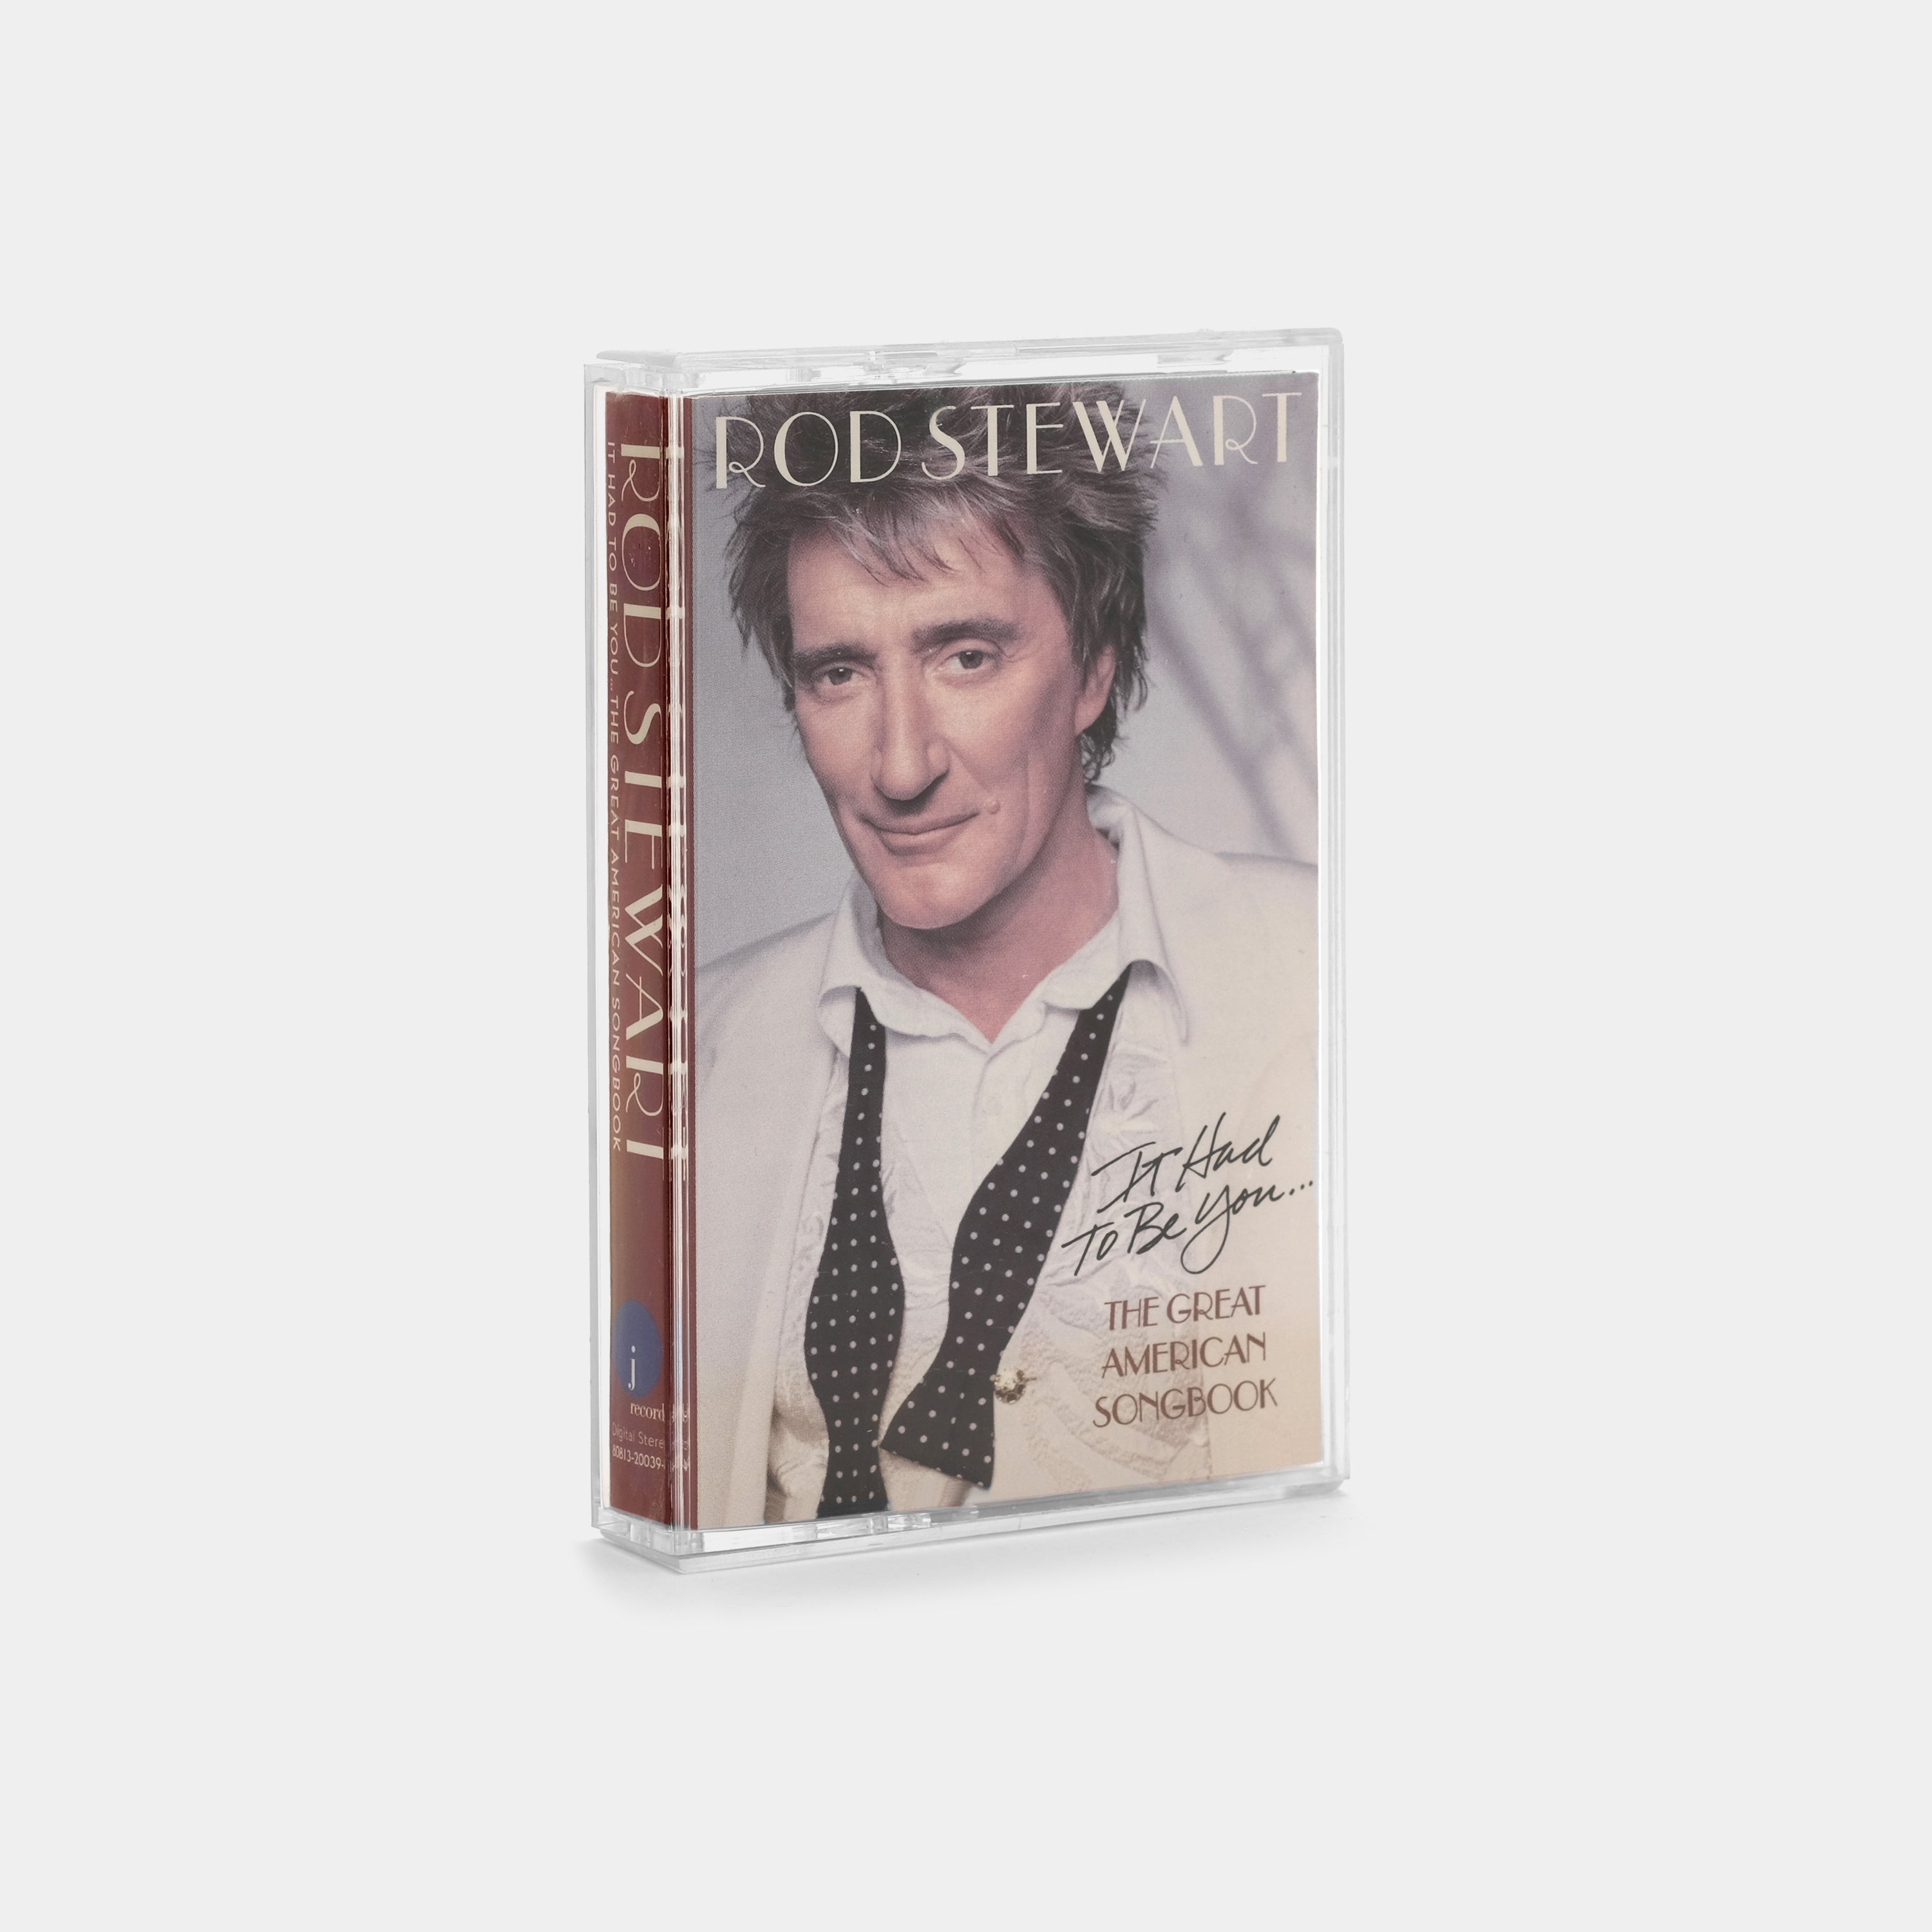 Rod Stewart - It Had To Be You... The Great American Songbook Cassette Tape